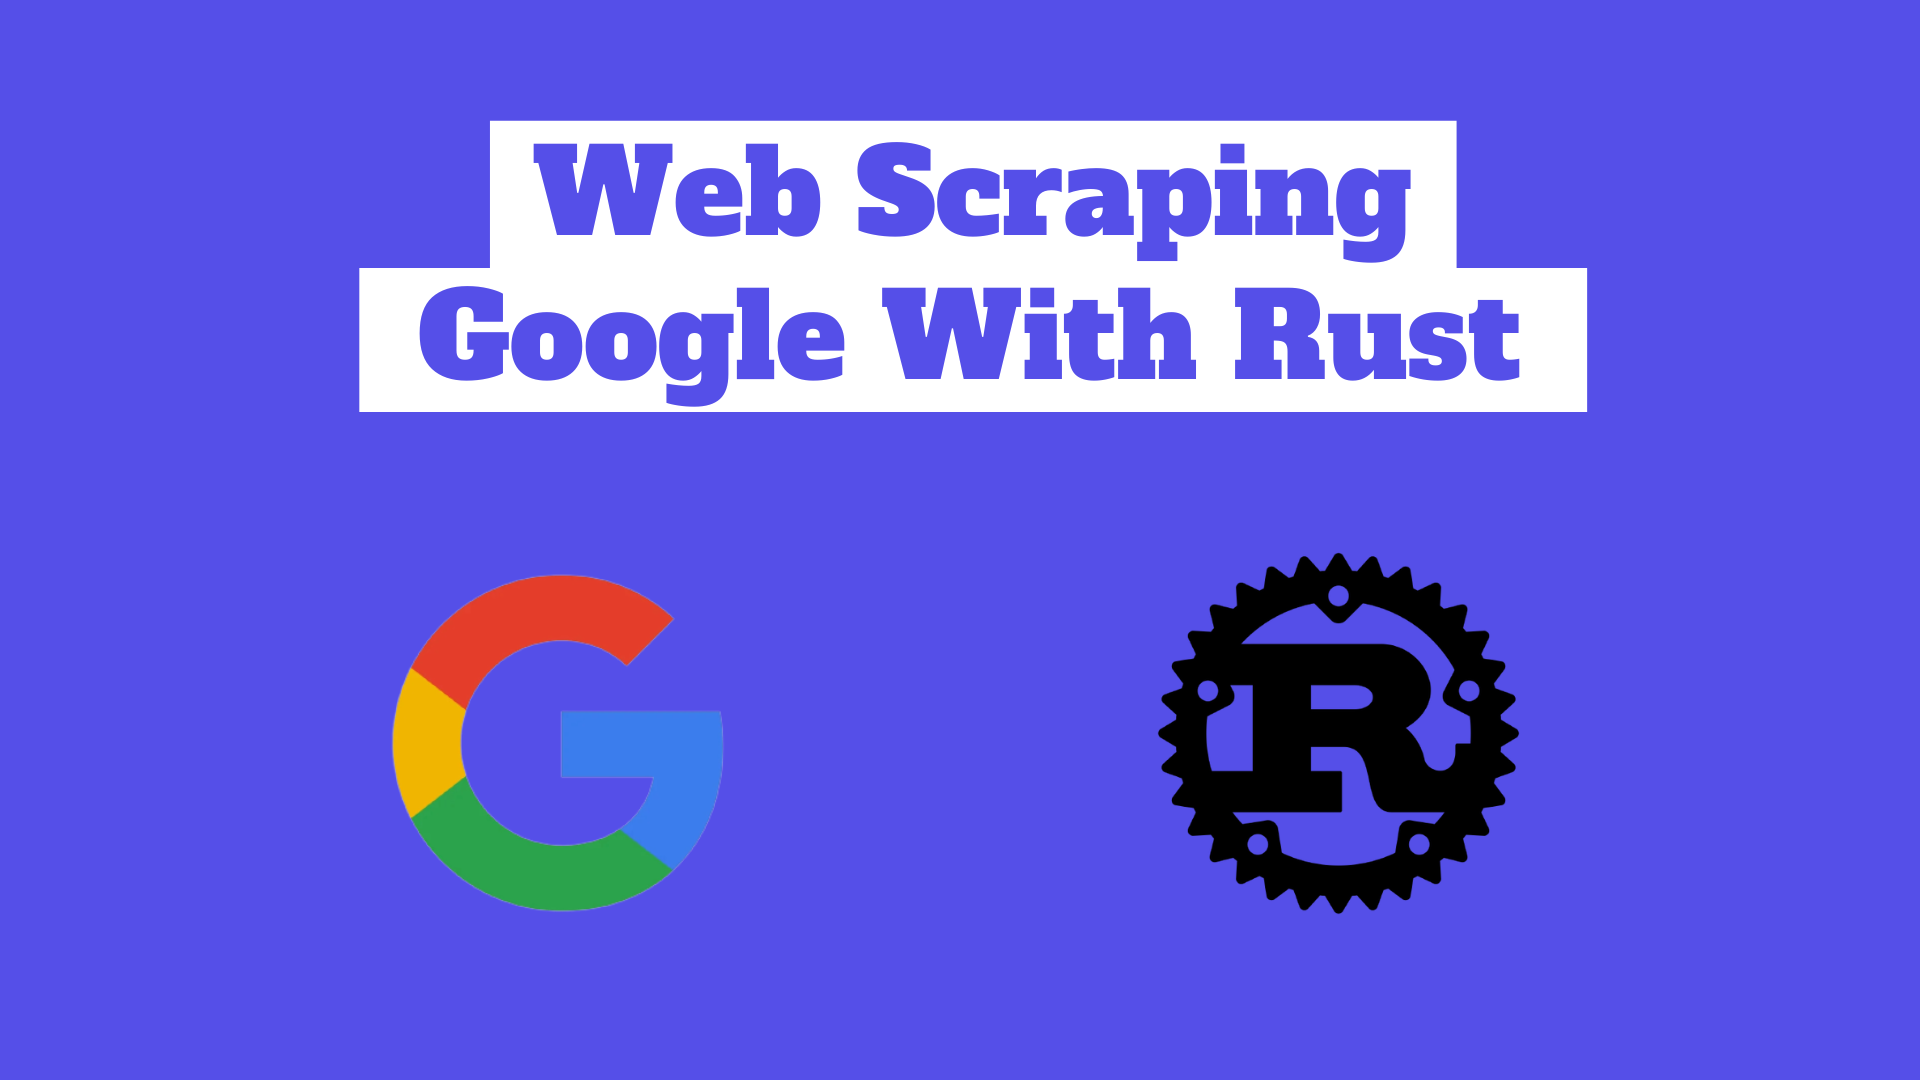 Scraping Google With Rust